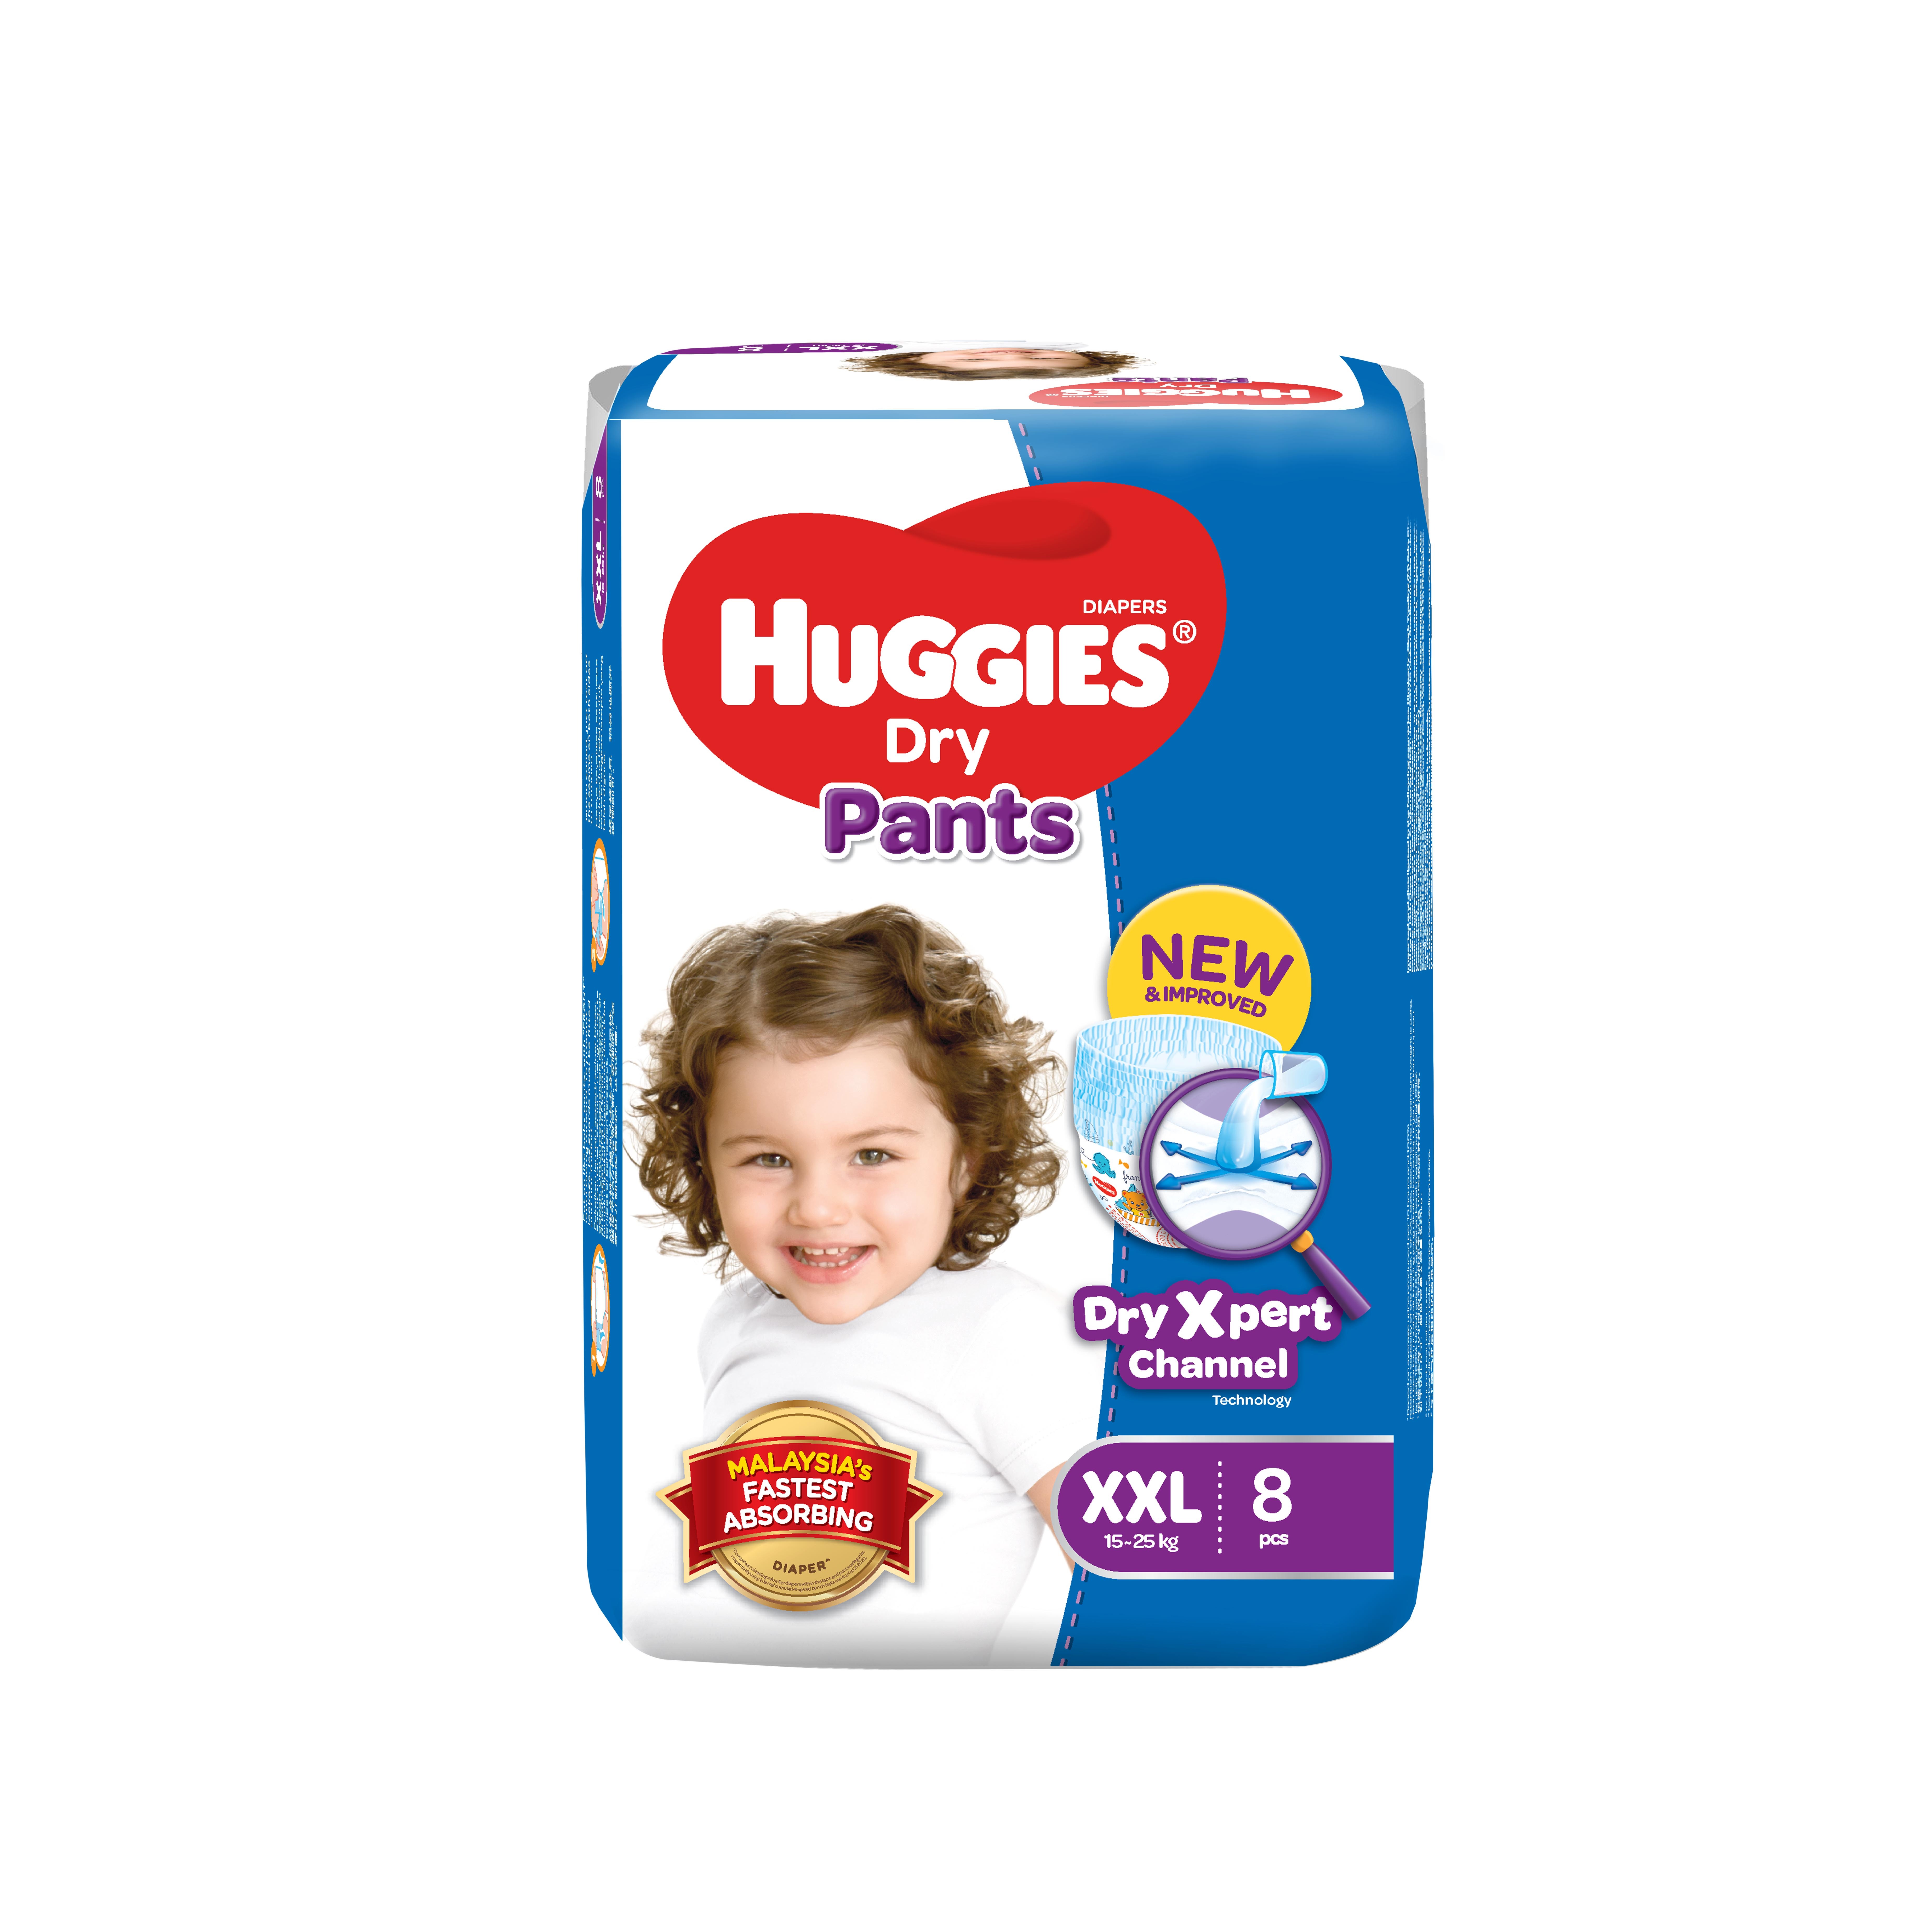 London Exclusive  Huggies Dry Pant Baby Diaper XL42 Pcs 1217 KG To  order call us at  01855903300  or message mmelondonexclusivebd Or  Visit Our Showroom Shop A House36 Road3 BlockC